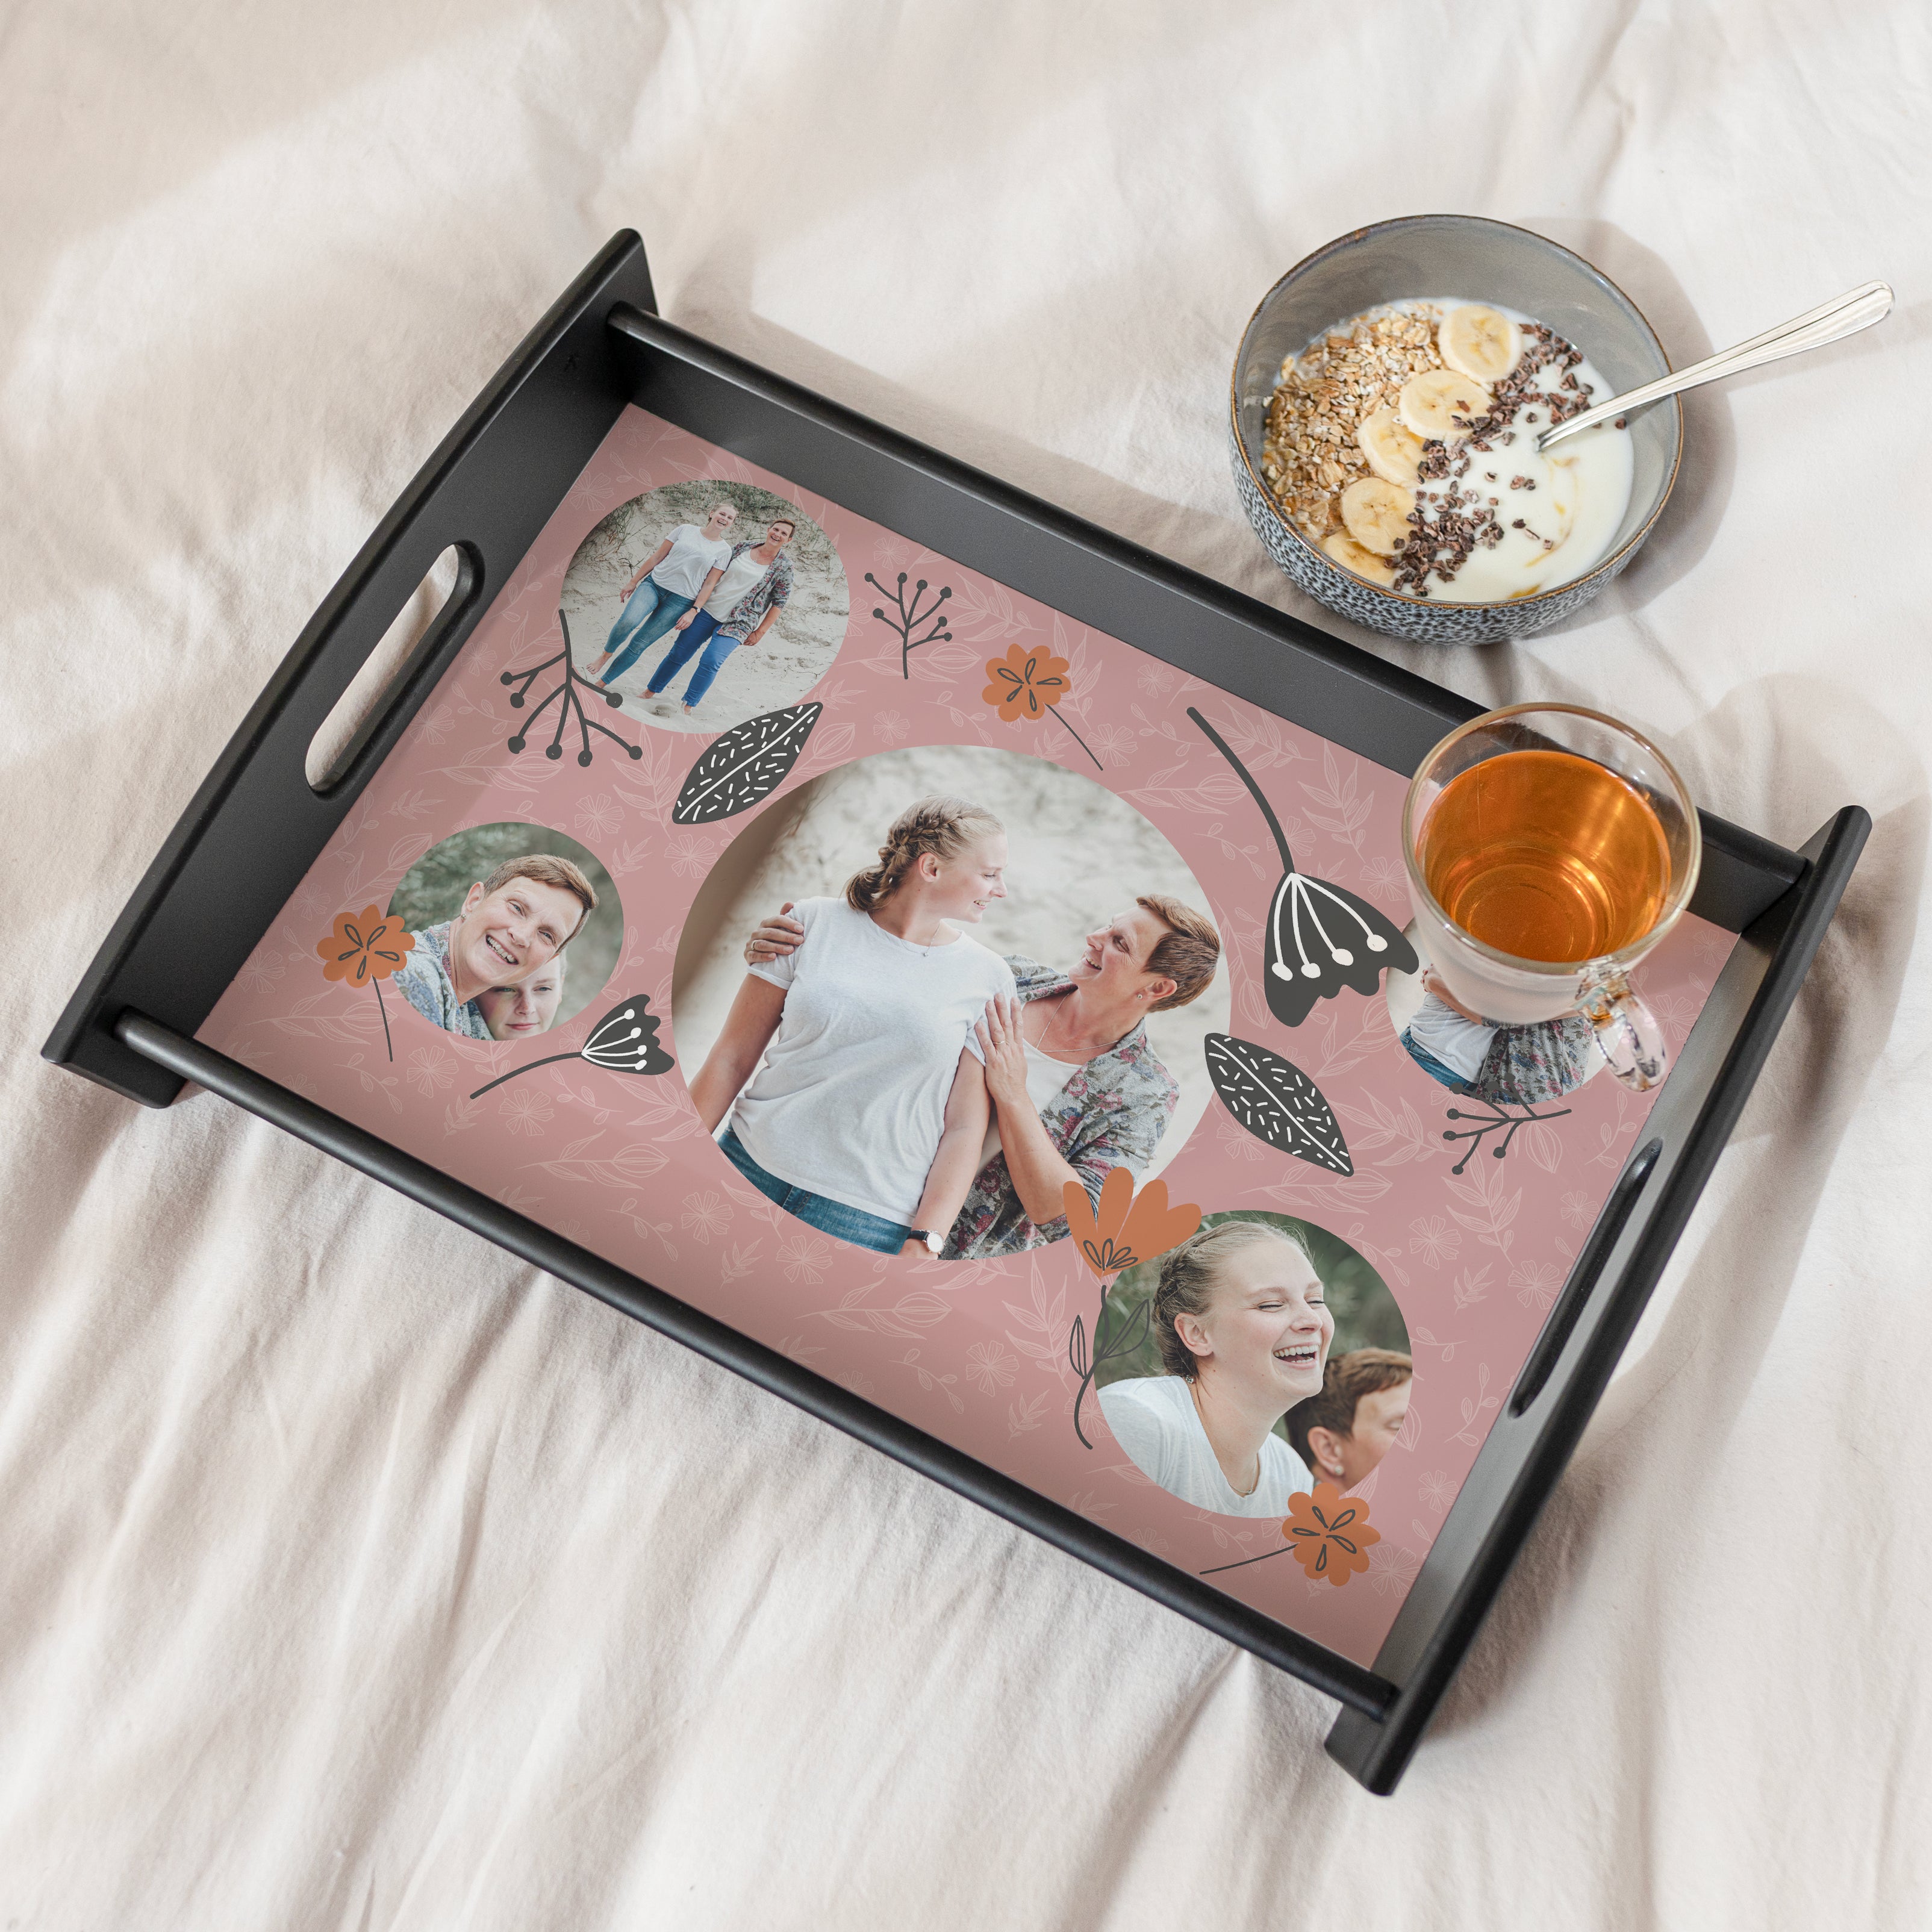 Personalised wooden serving tray - Black - Large